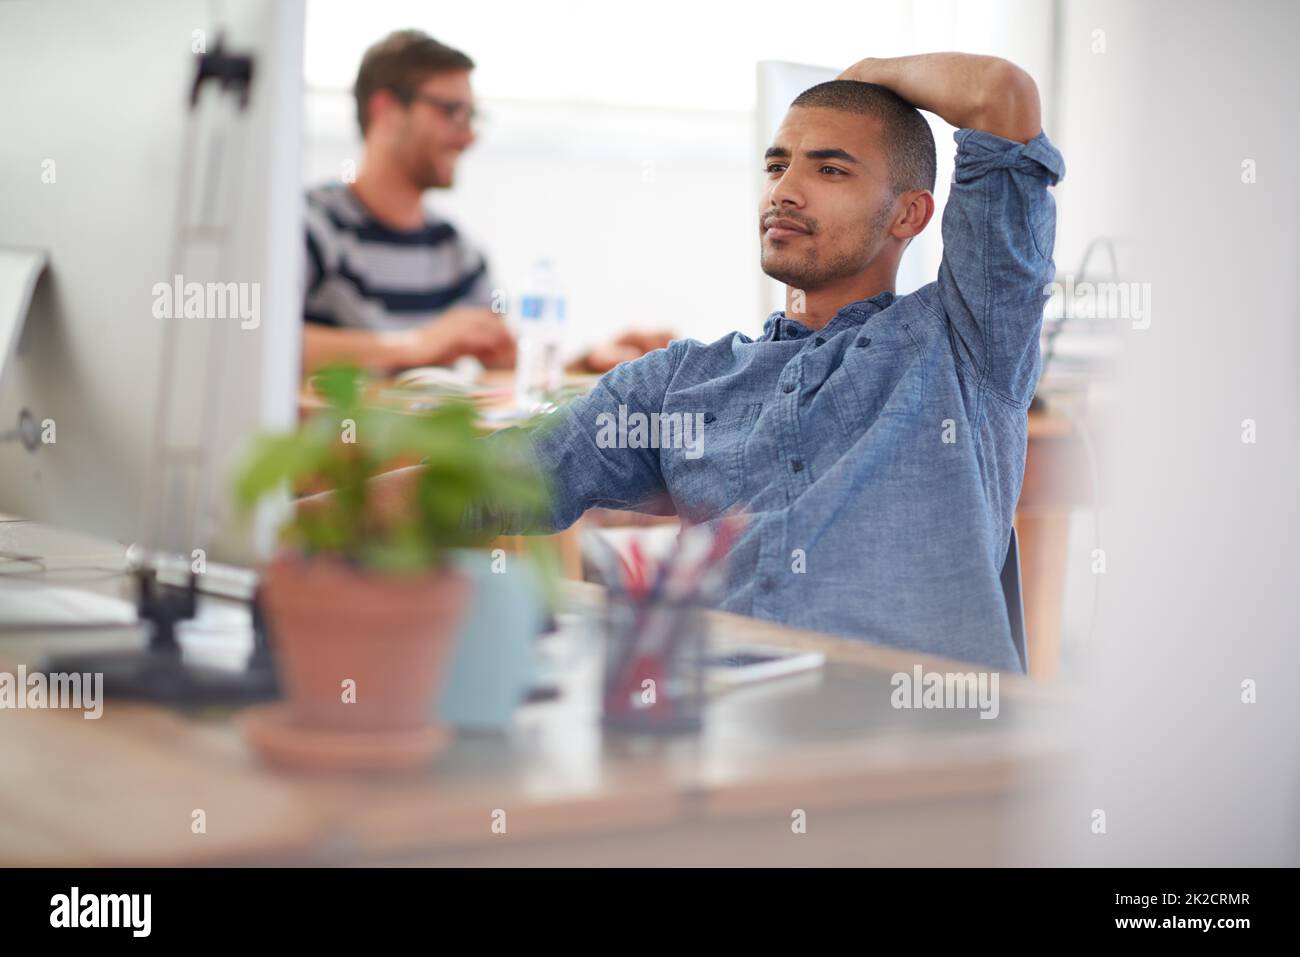 Trouble shooting modern problems. Serious young multi-ethnic man working at his desk in an open plan work space. Stock Photo